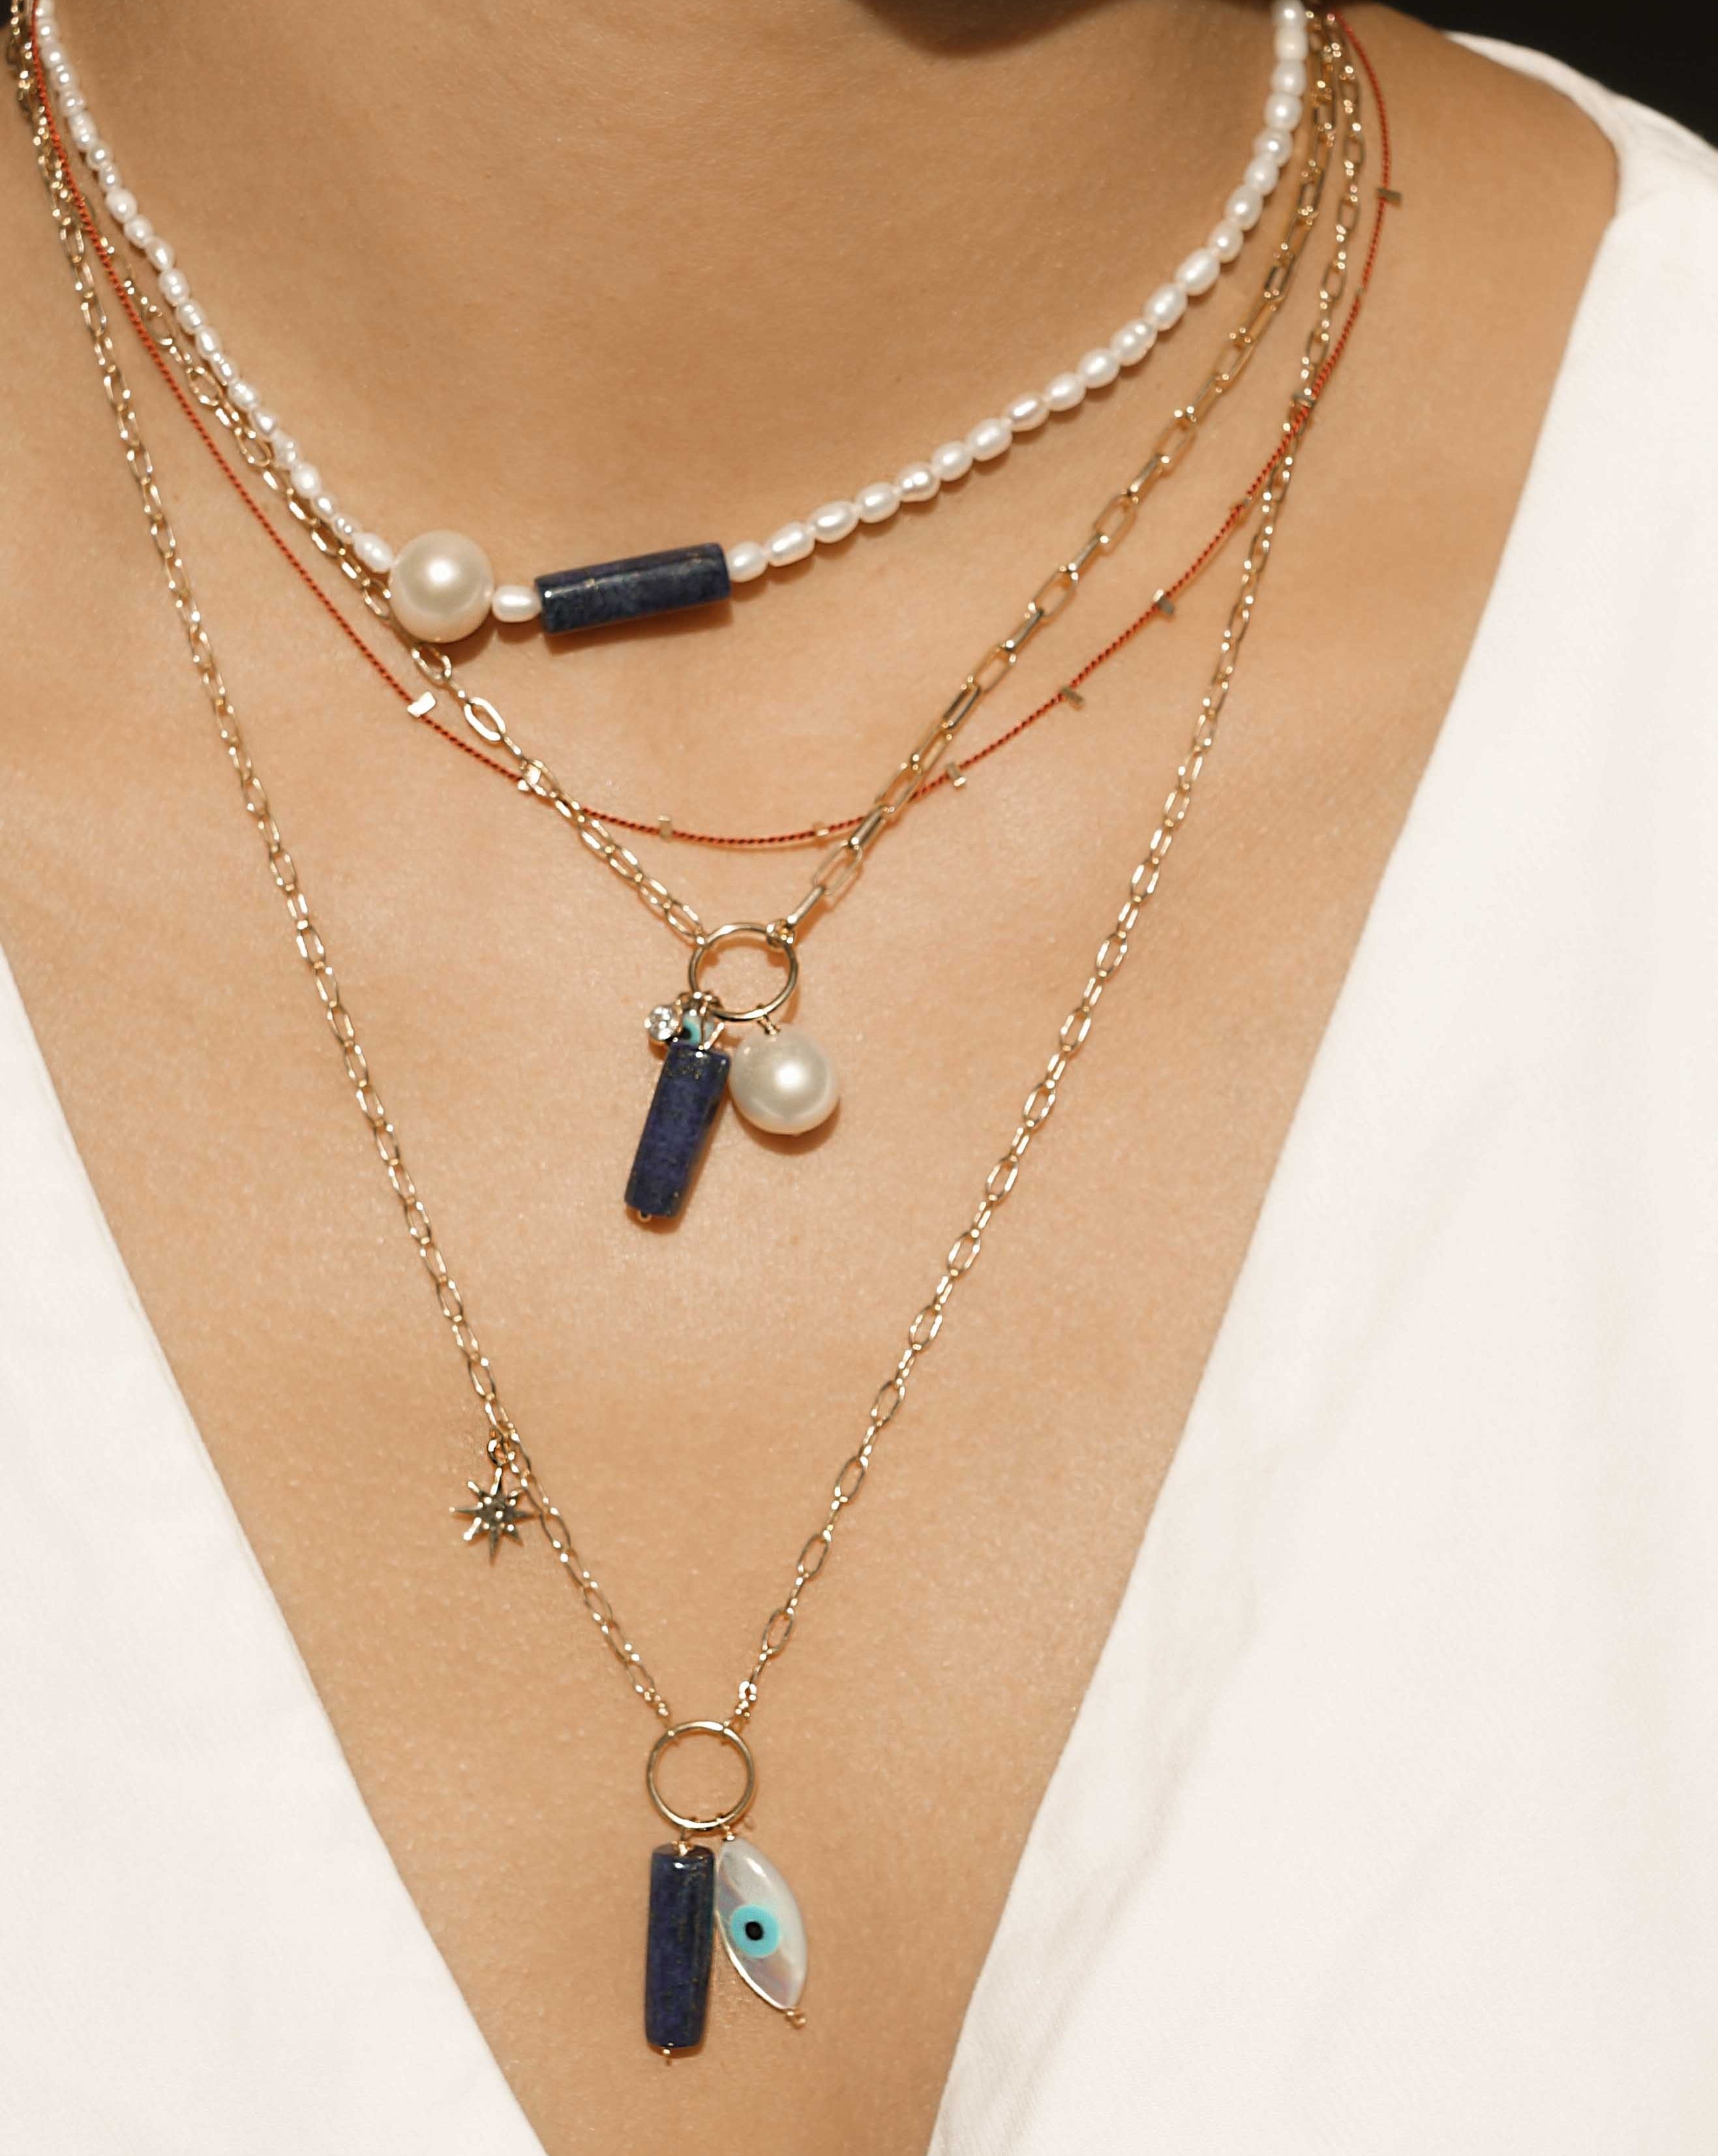 Wisdomkeeper Necklace by KOZAKH. A 15 to 17 inch adjustable length, freshwater rice pearl strand necklace, clasp crafted in 14K Gold Filled, featuring a round Freshwater Pearl and a cylindrical cut Lapis. 